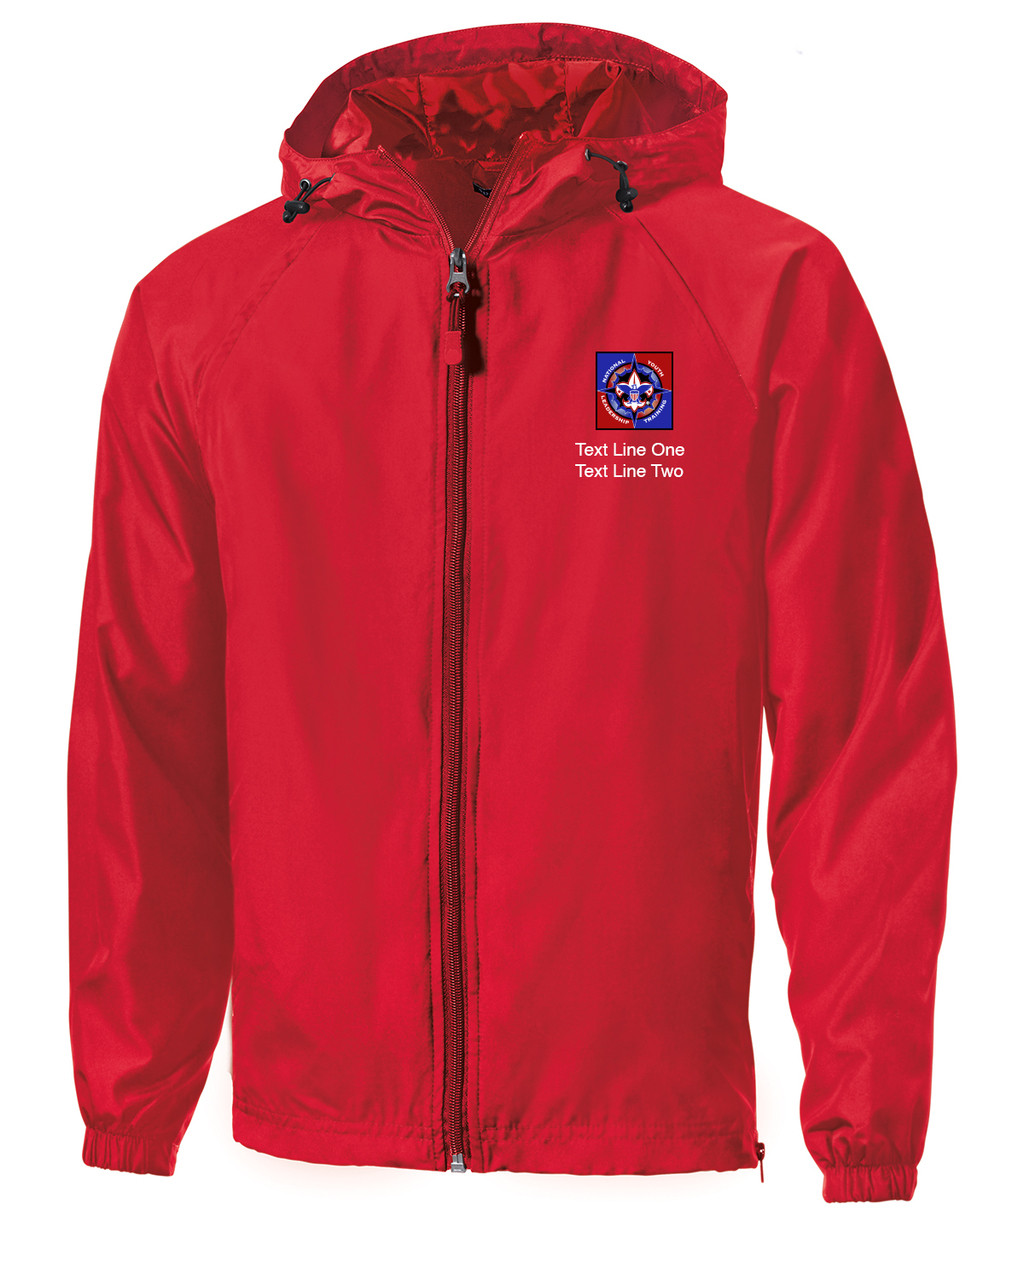 Scouts BSA Red Jacket with NYLT Logo